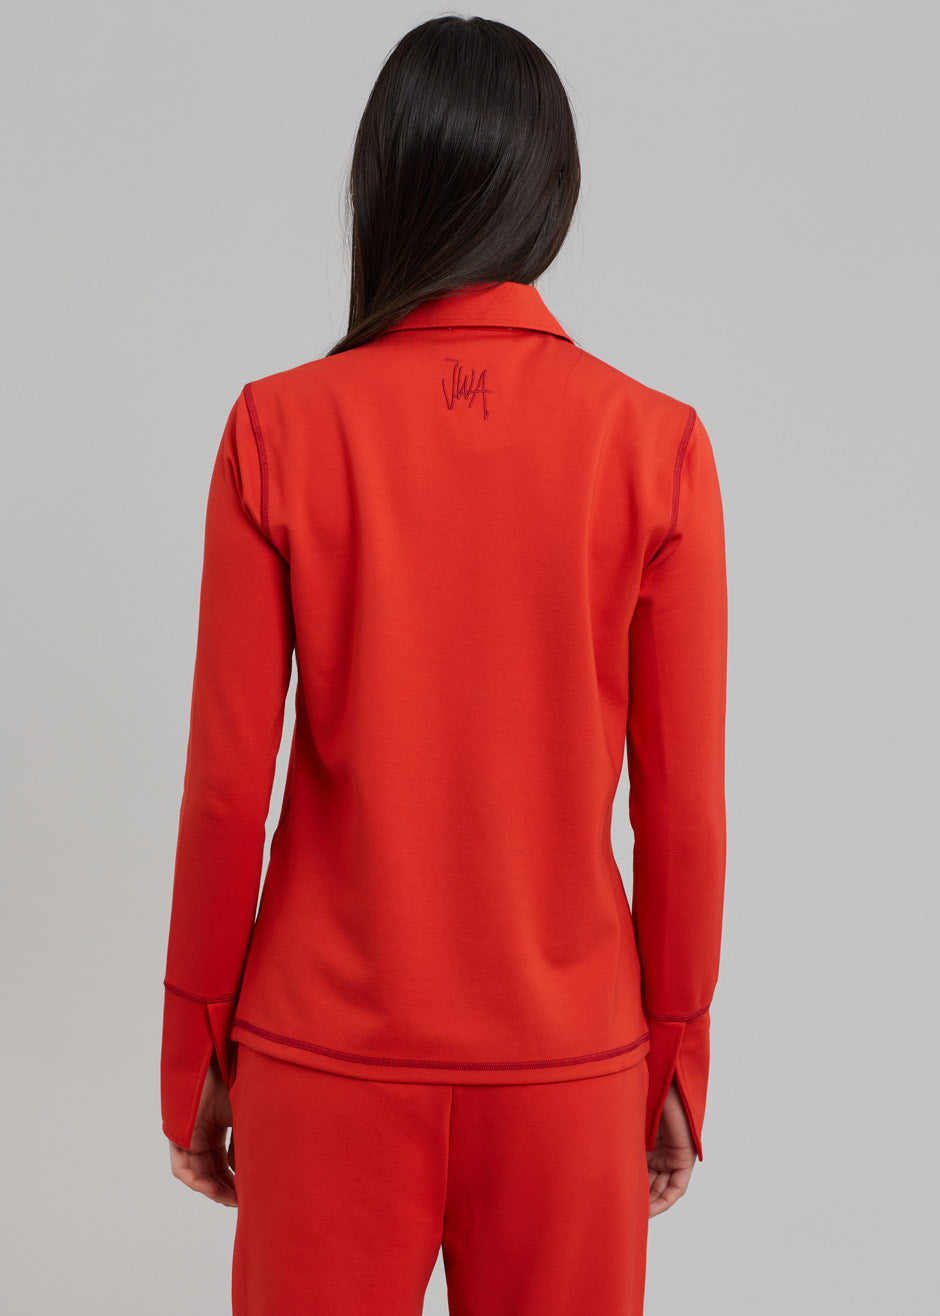 JW Anderson Ring Puller Half Zip Track Top - Red - 9